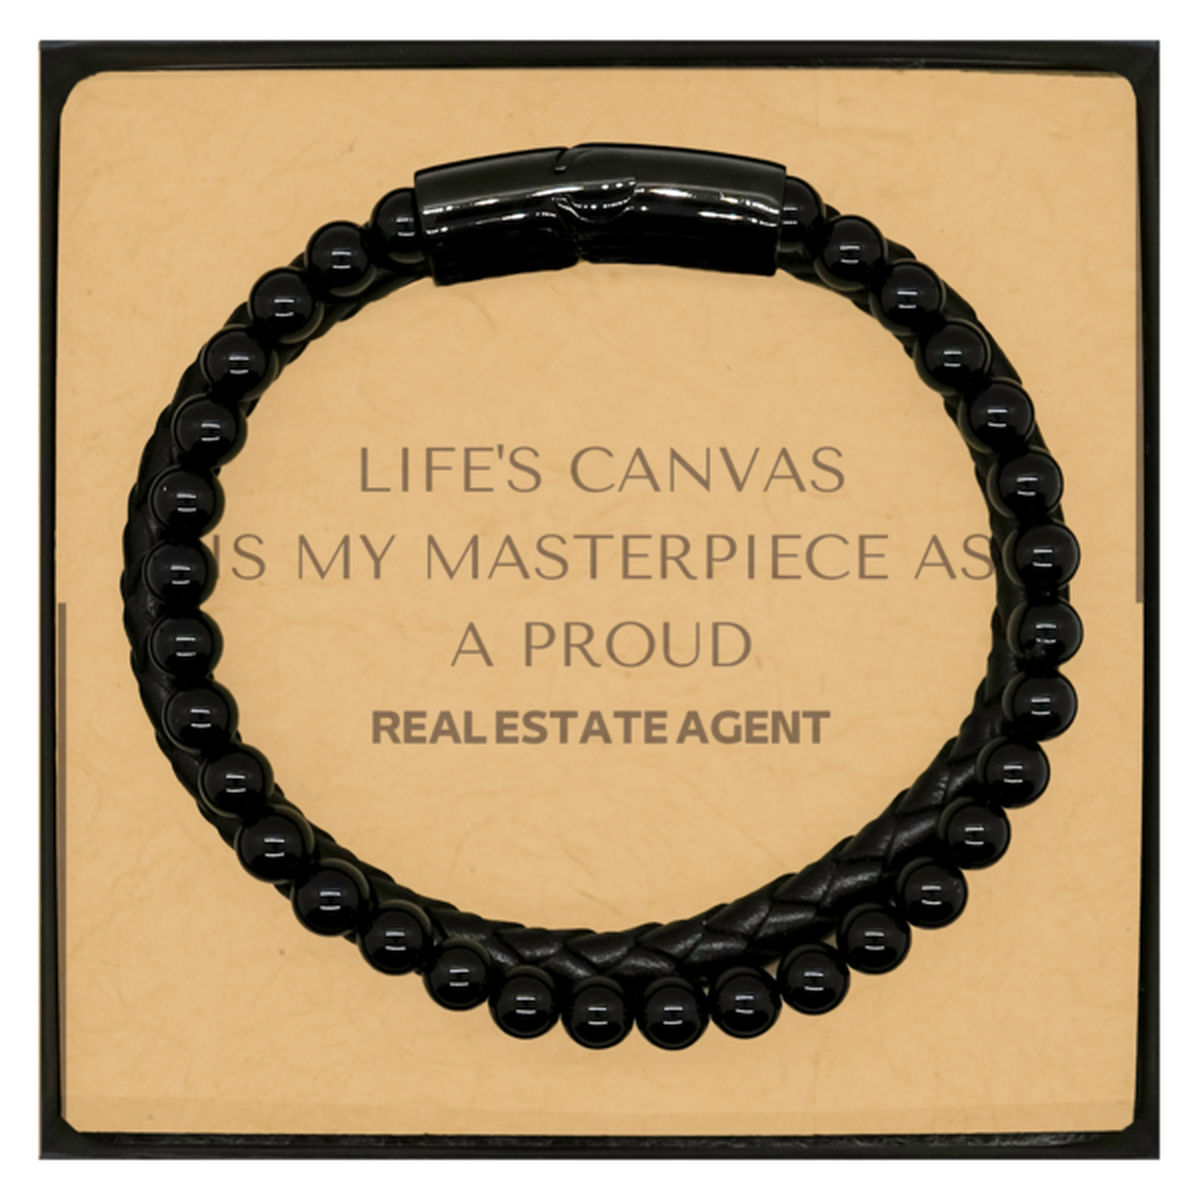 Proud Real Estate Agent Gifts, Life's canvas is my masterpiece, Epic Birthday Christmas Unique Stone Leather Bracelets For Real Estate Agent, Coworkers, Men, Women, Friends